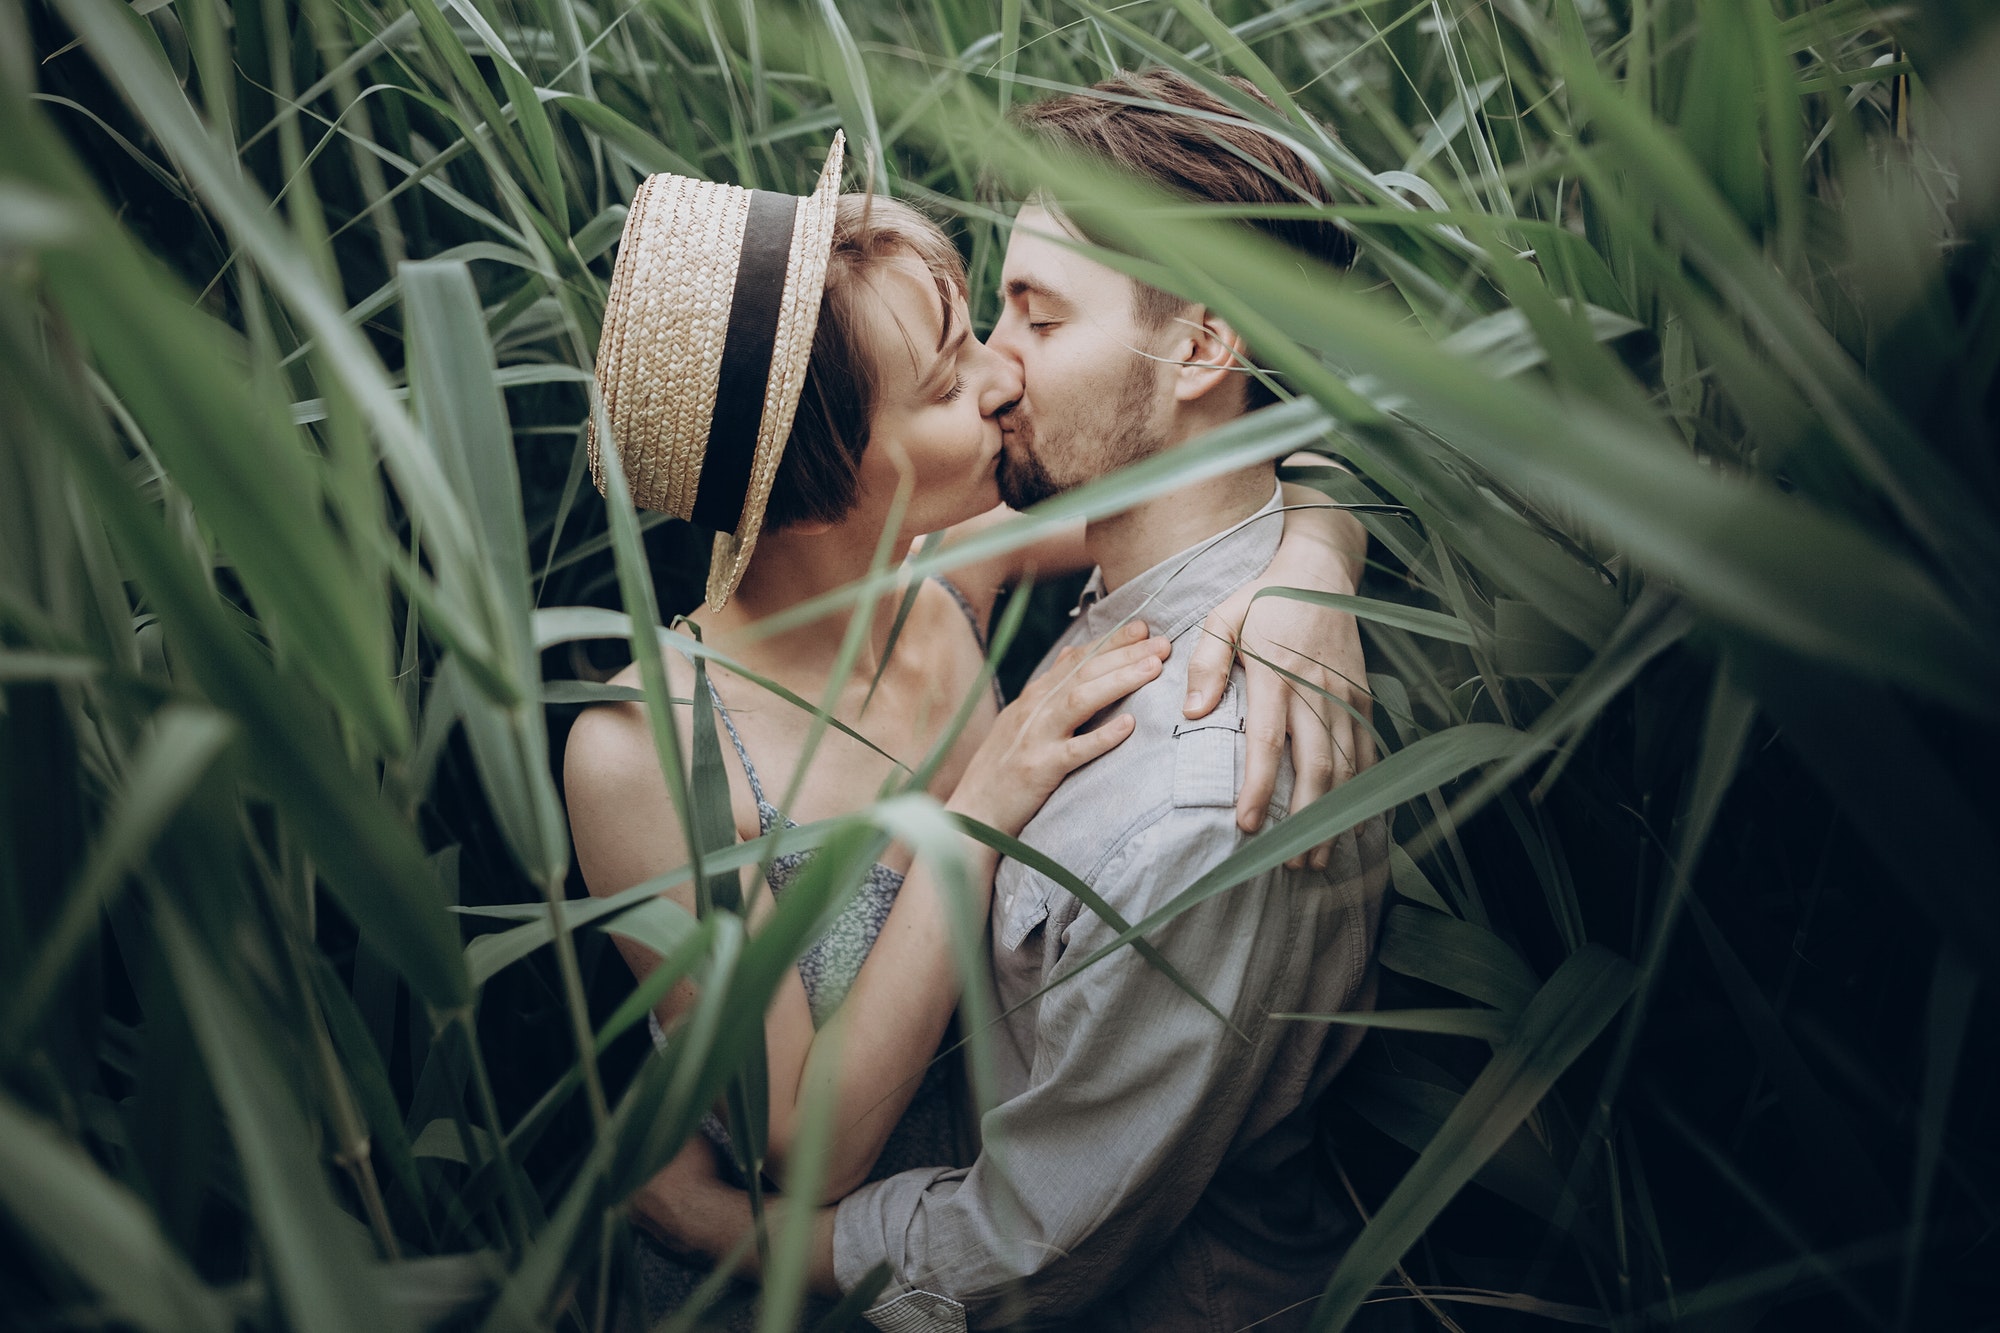 happy-hipster-couple-embracing-at-lake-in-cane.jpg